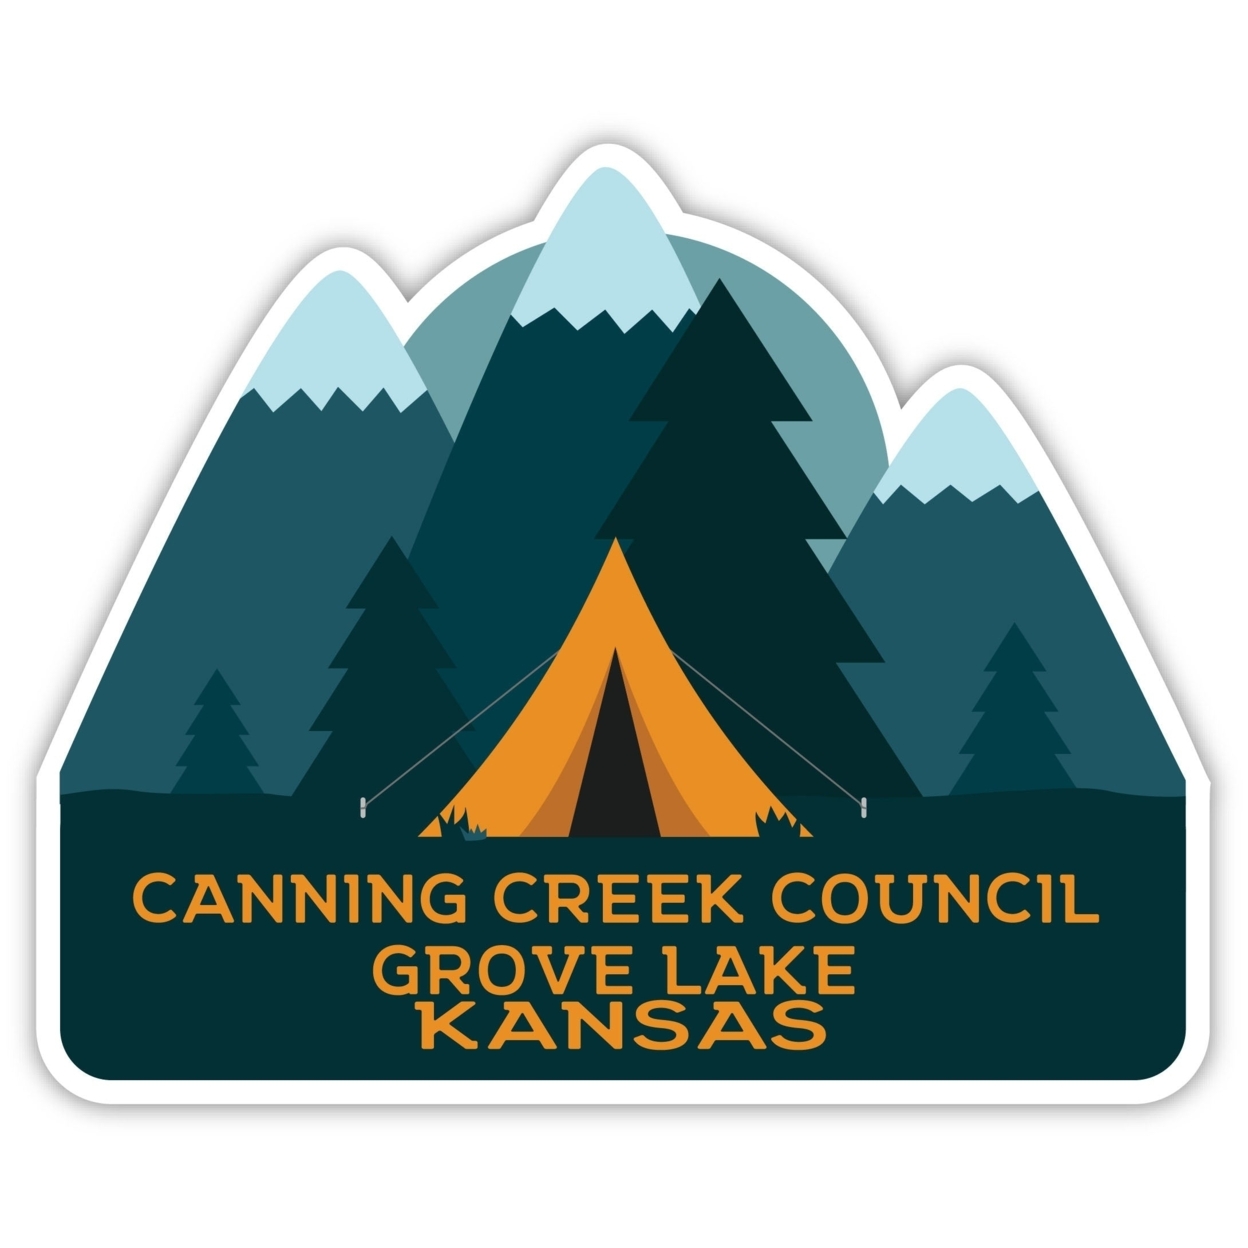 Canning Creek Council Grove Lake Kansas Souvenir Decorative Stickers (Choose Theme And Size) - 4-Pack, 12-Inch, Tent